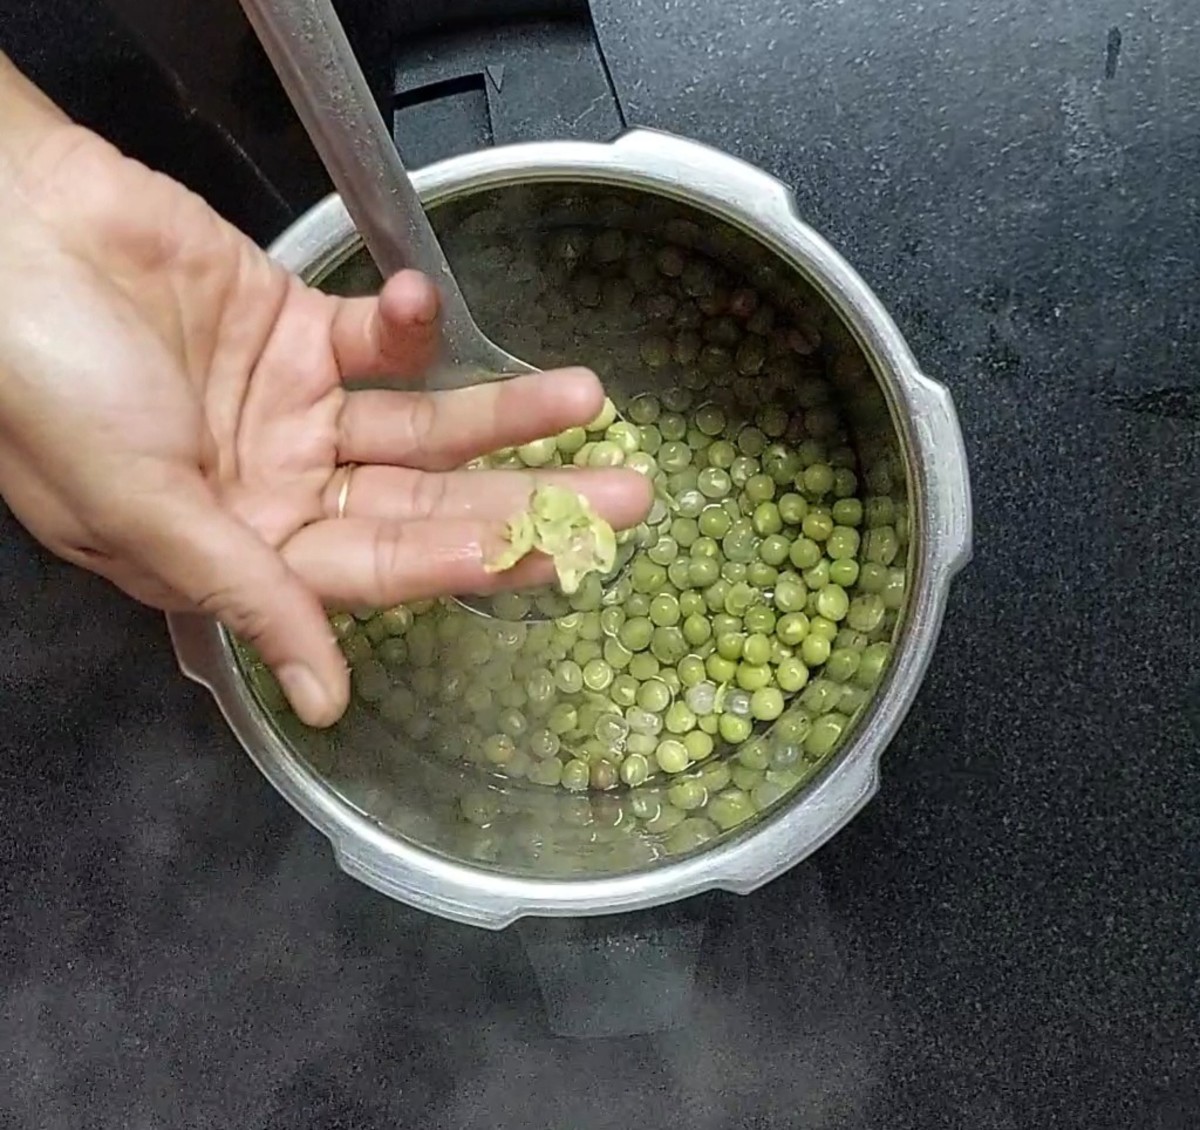 Once the pressure of the cooker releases, open the lid, check to see if peas are cooked completely. Set aside.